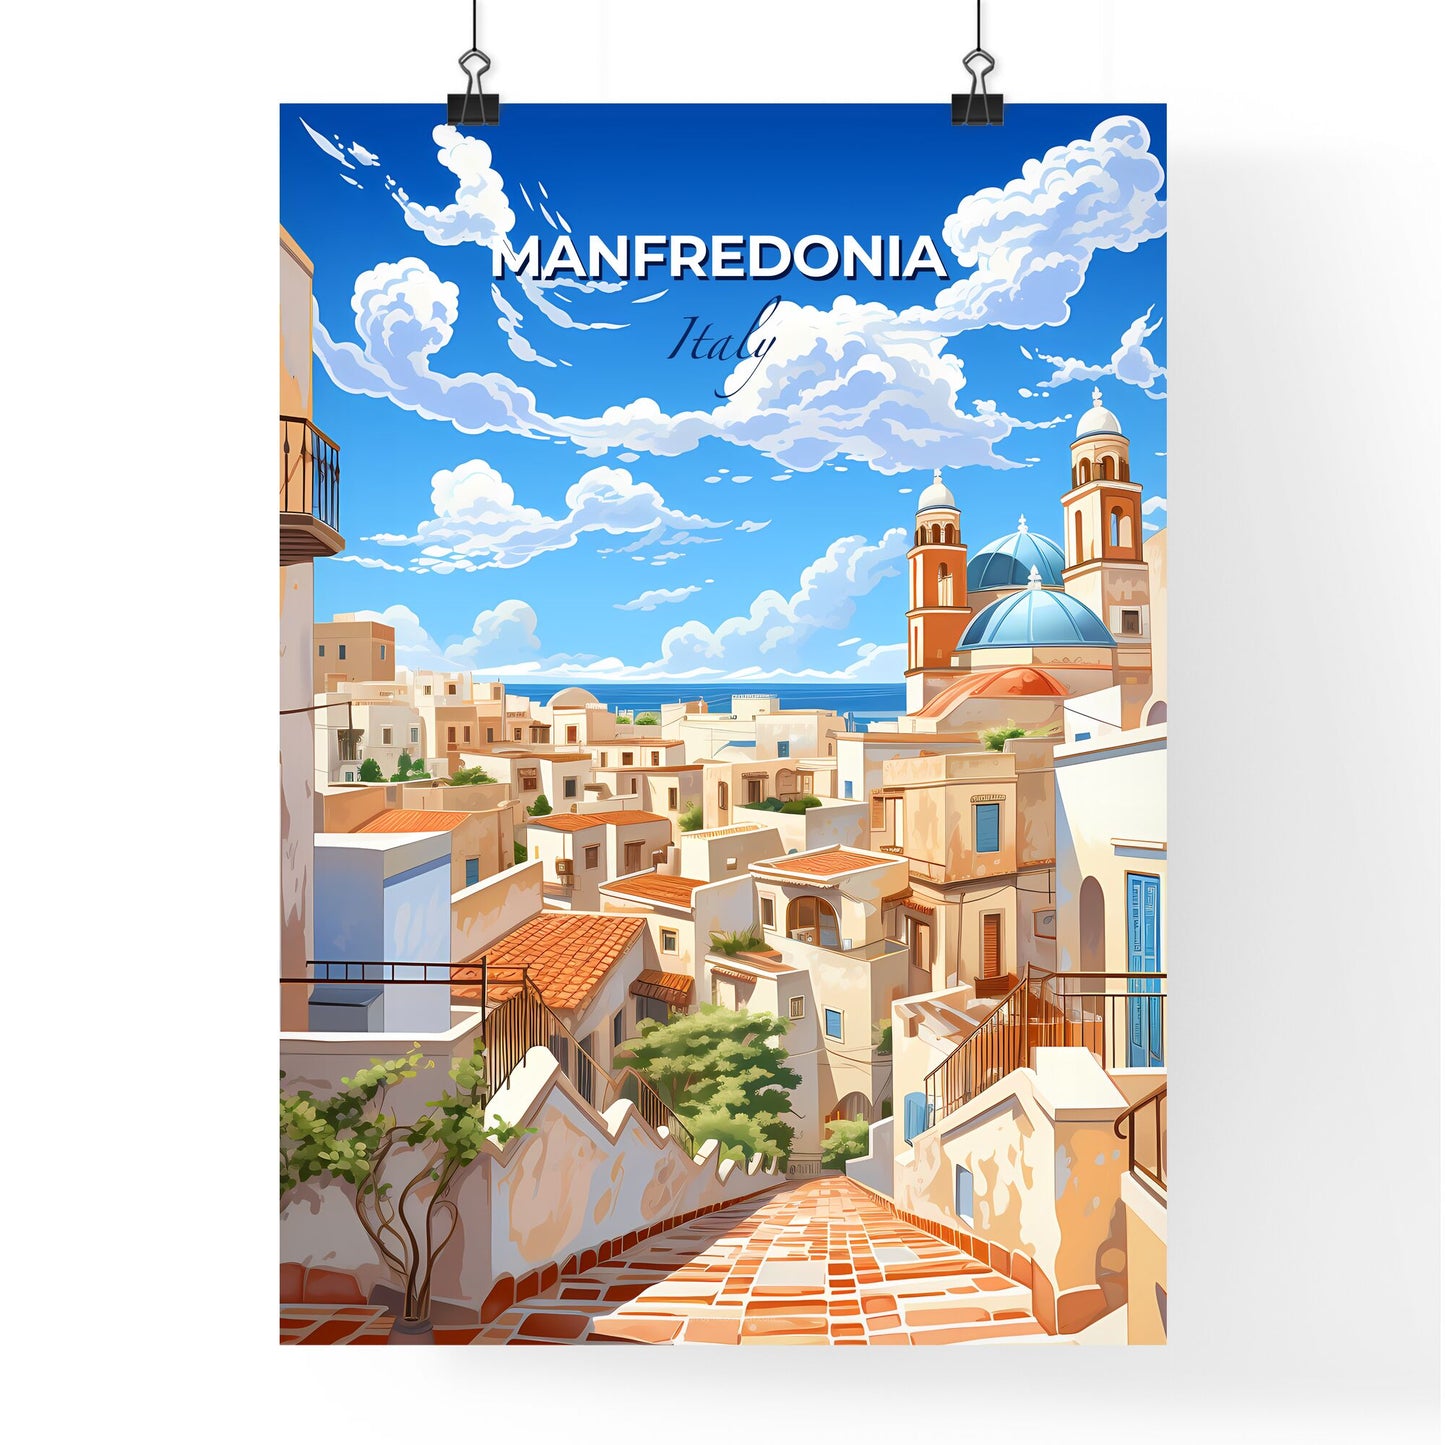 Manfredonia, Italy, A Poster of a city with a blue sky and clouds Default Title